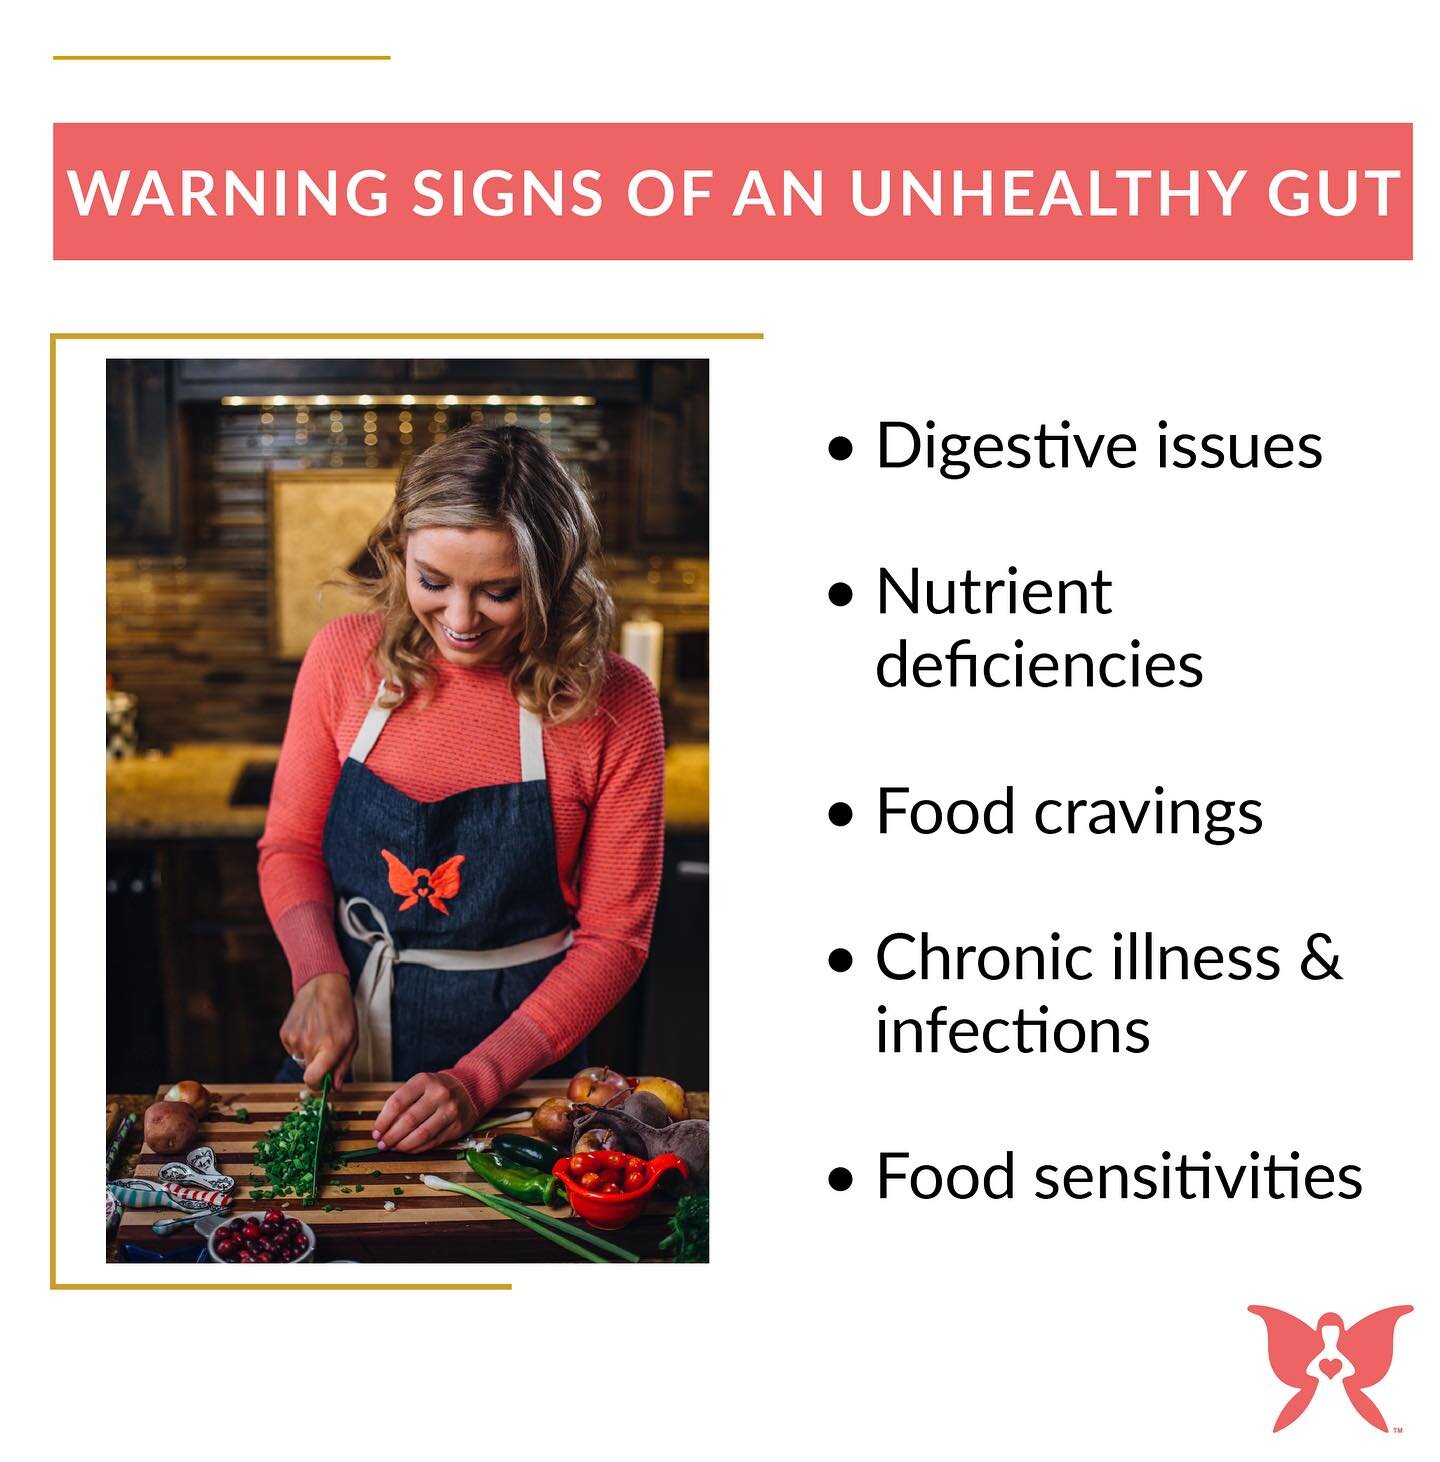 The gut should always be the first place to start when thinking about maintaining optimal health. However, if you&rsquo;re curious about whether or not you have underlying gut issues to heal, here are a few signs you may want to look for:

✅Digestive